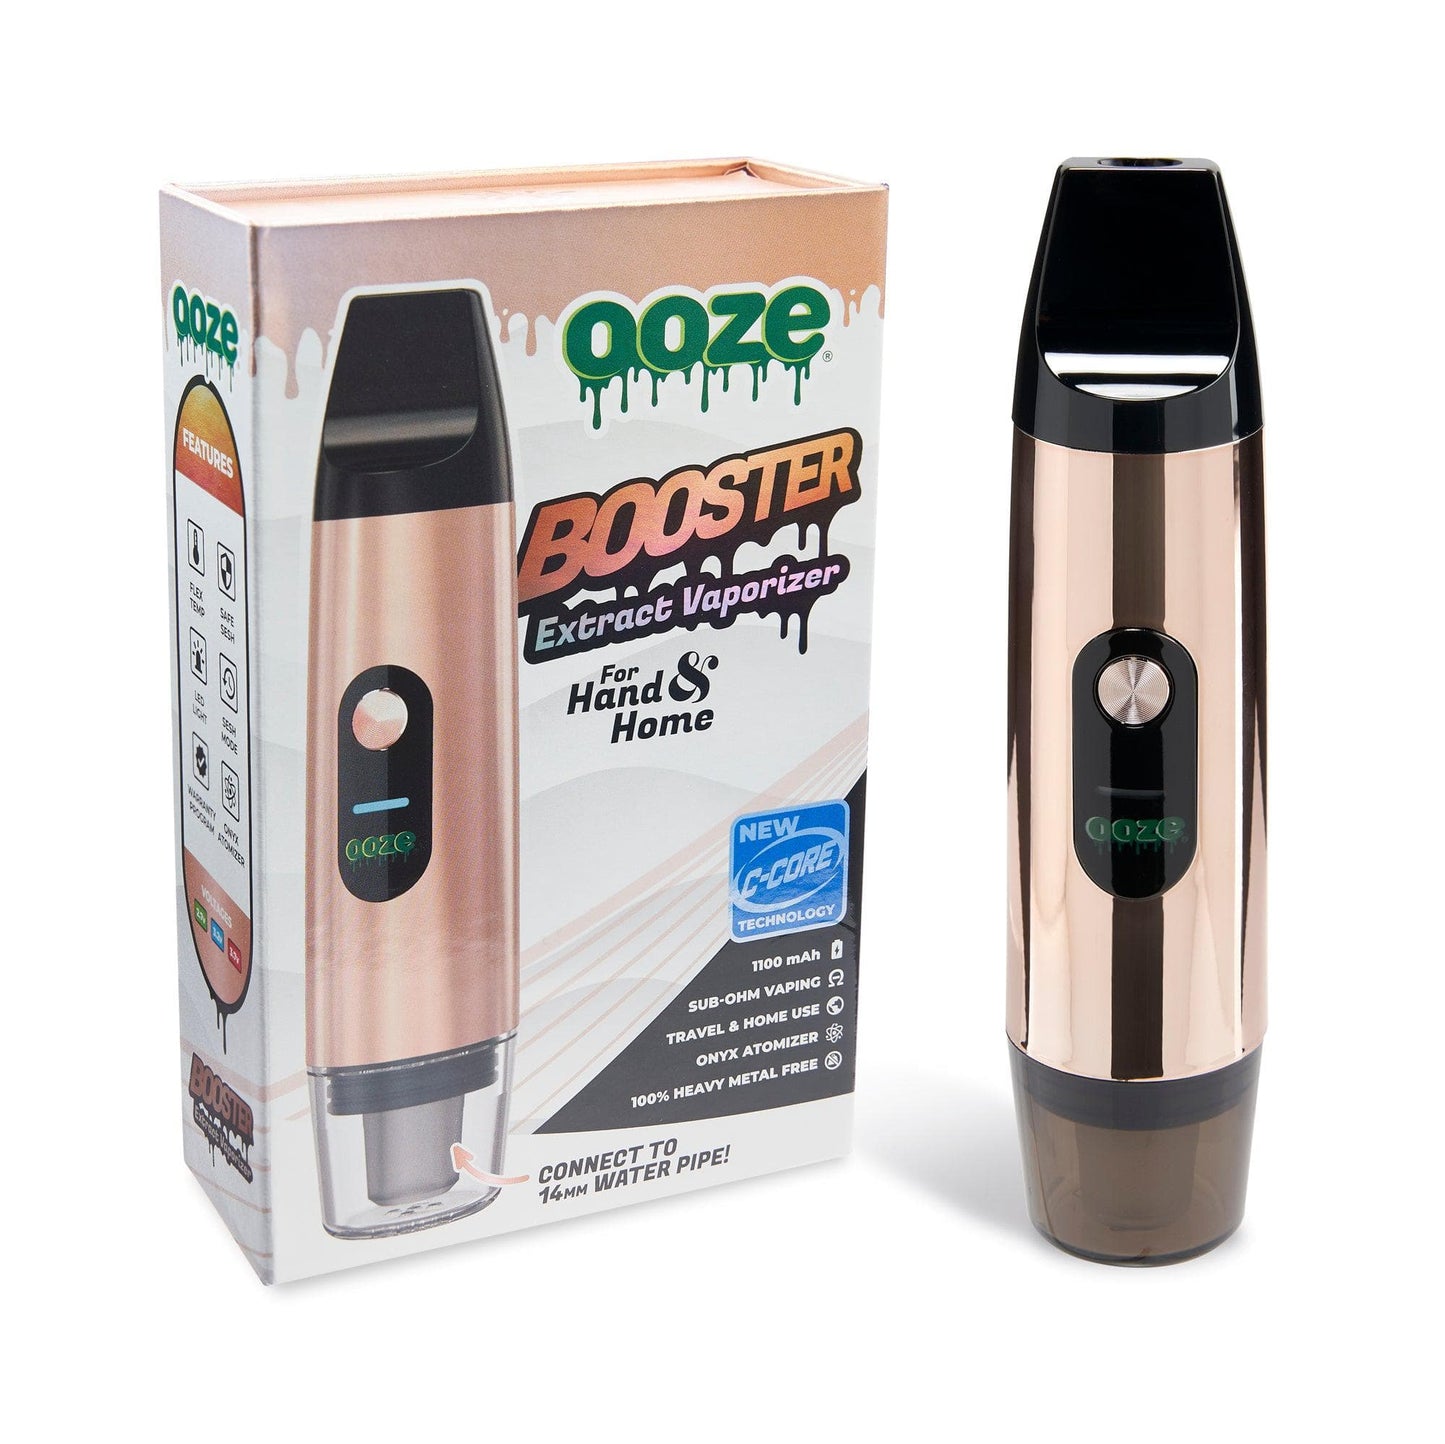 Ooze Batteries and Vapes Black Rose Ooze Booster Extract Vaporizer – C-Core 1100 mAh